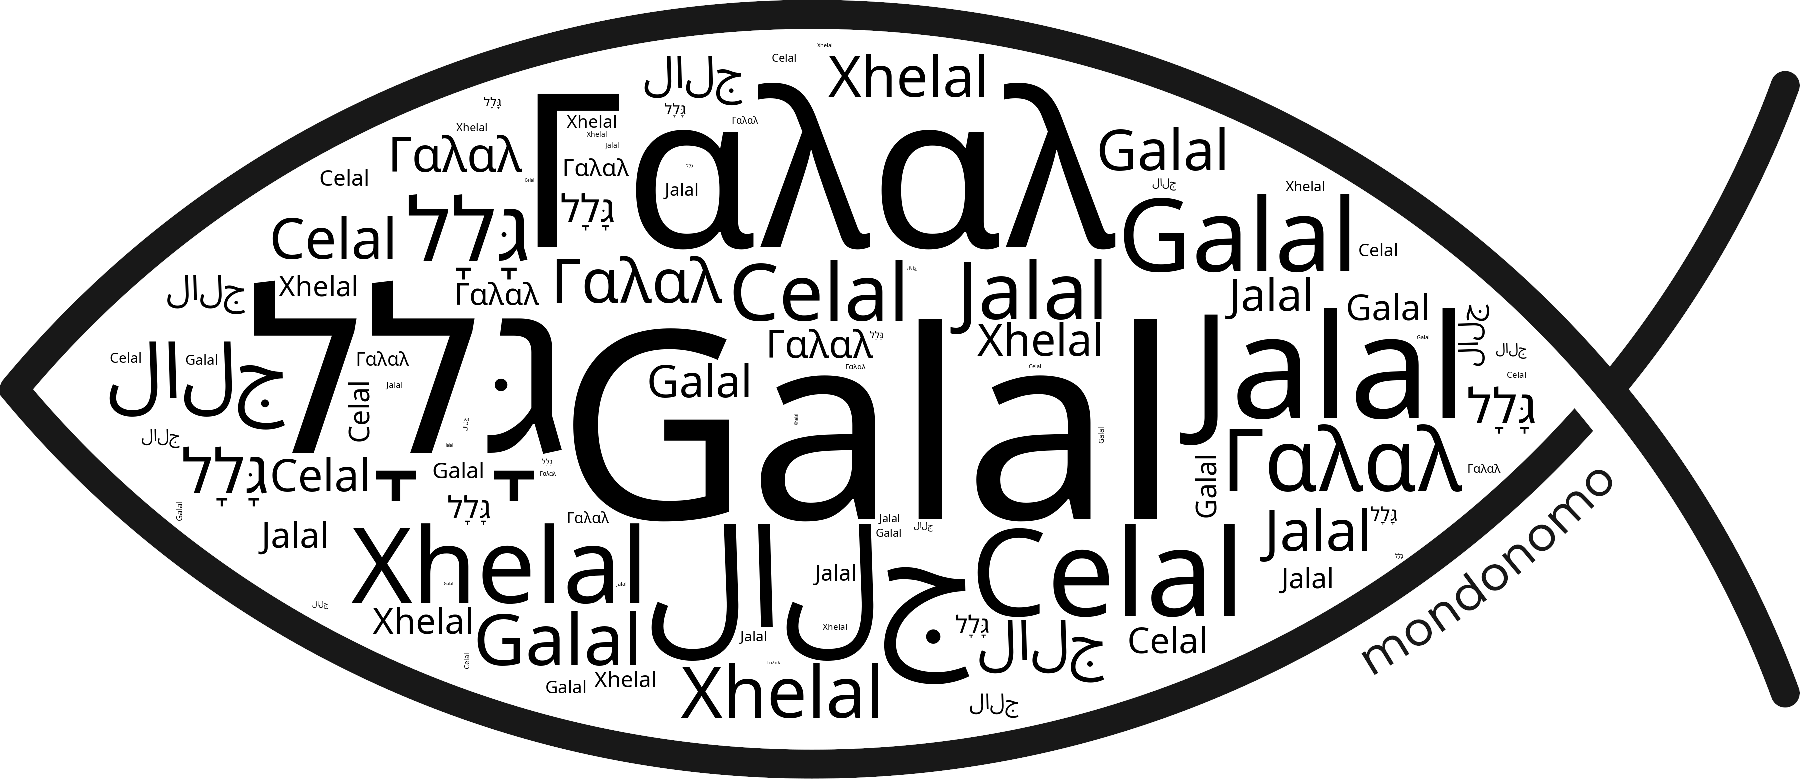 Name Galal in the world's Bibles